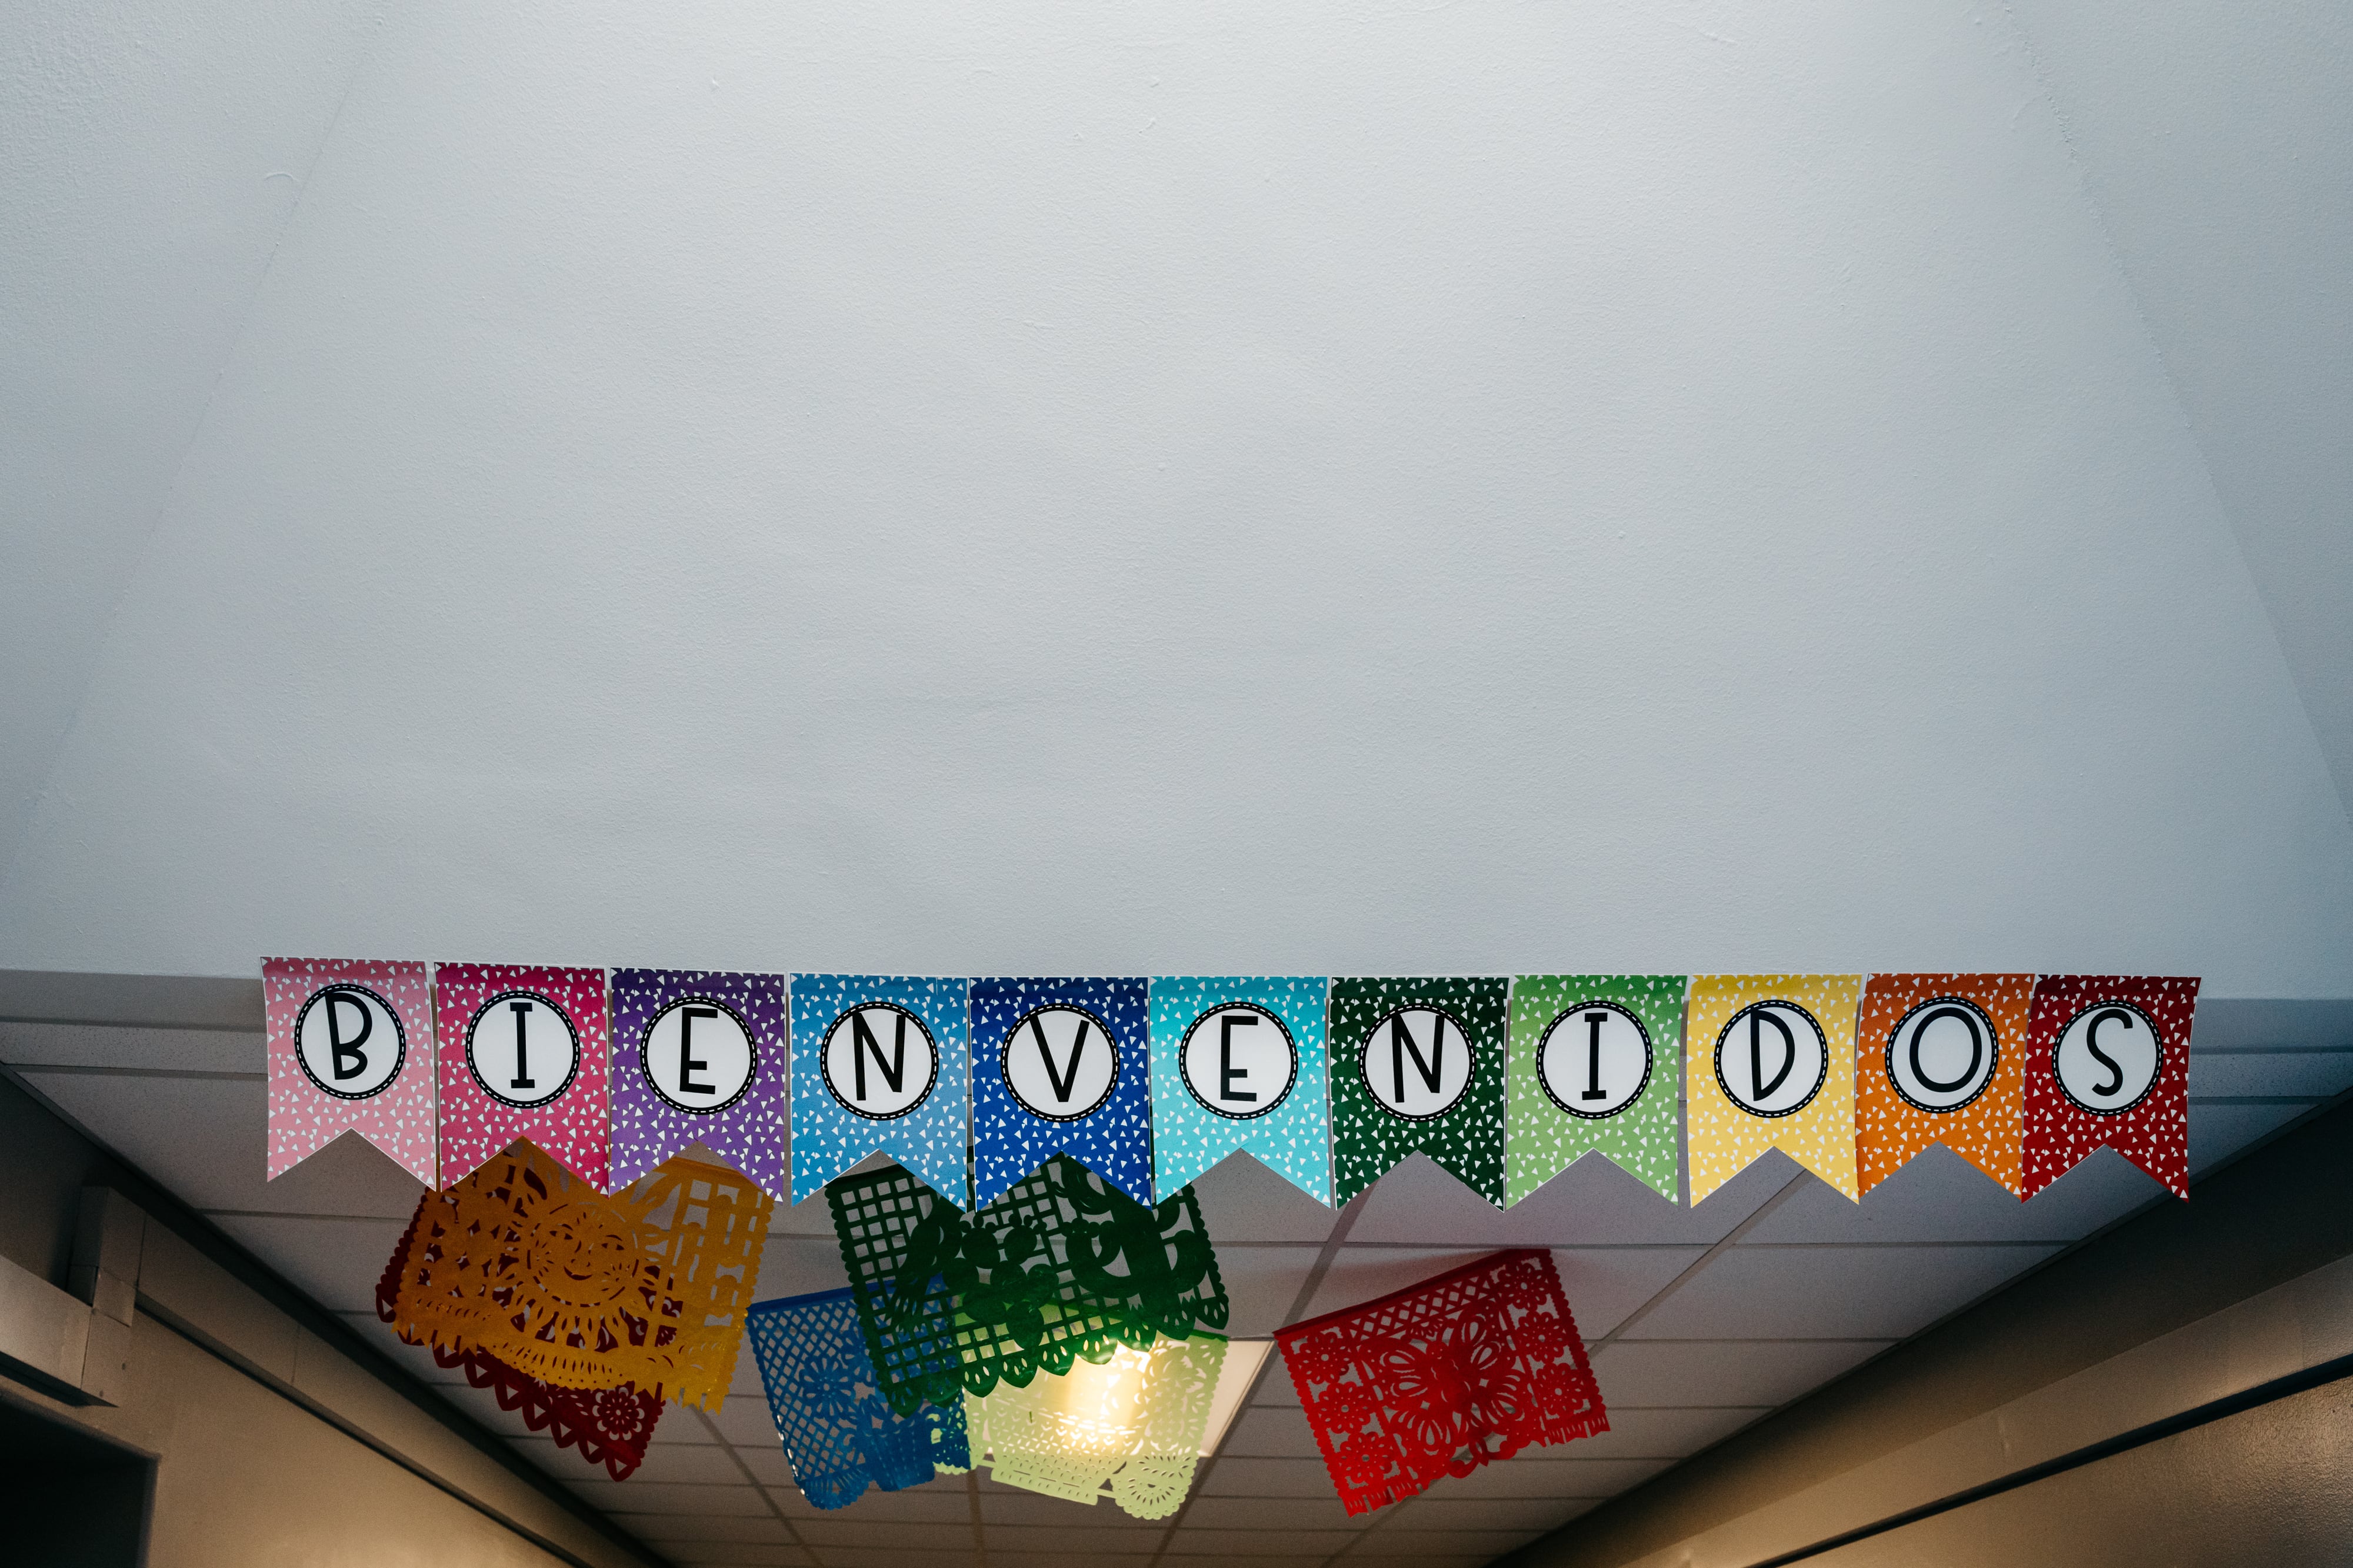 A colorful banner hanging from the ceiling that says "Bienvenidos," which is welcome in Spanish.